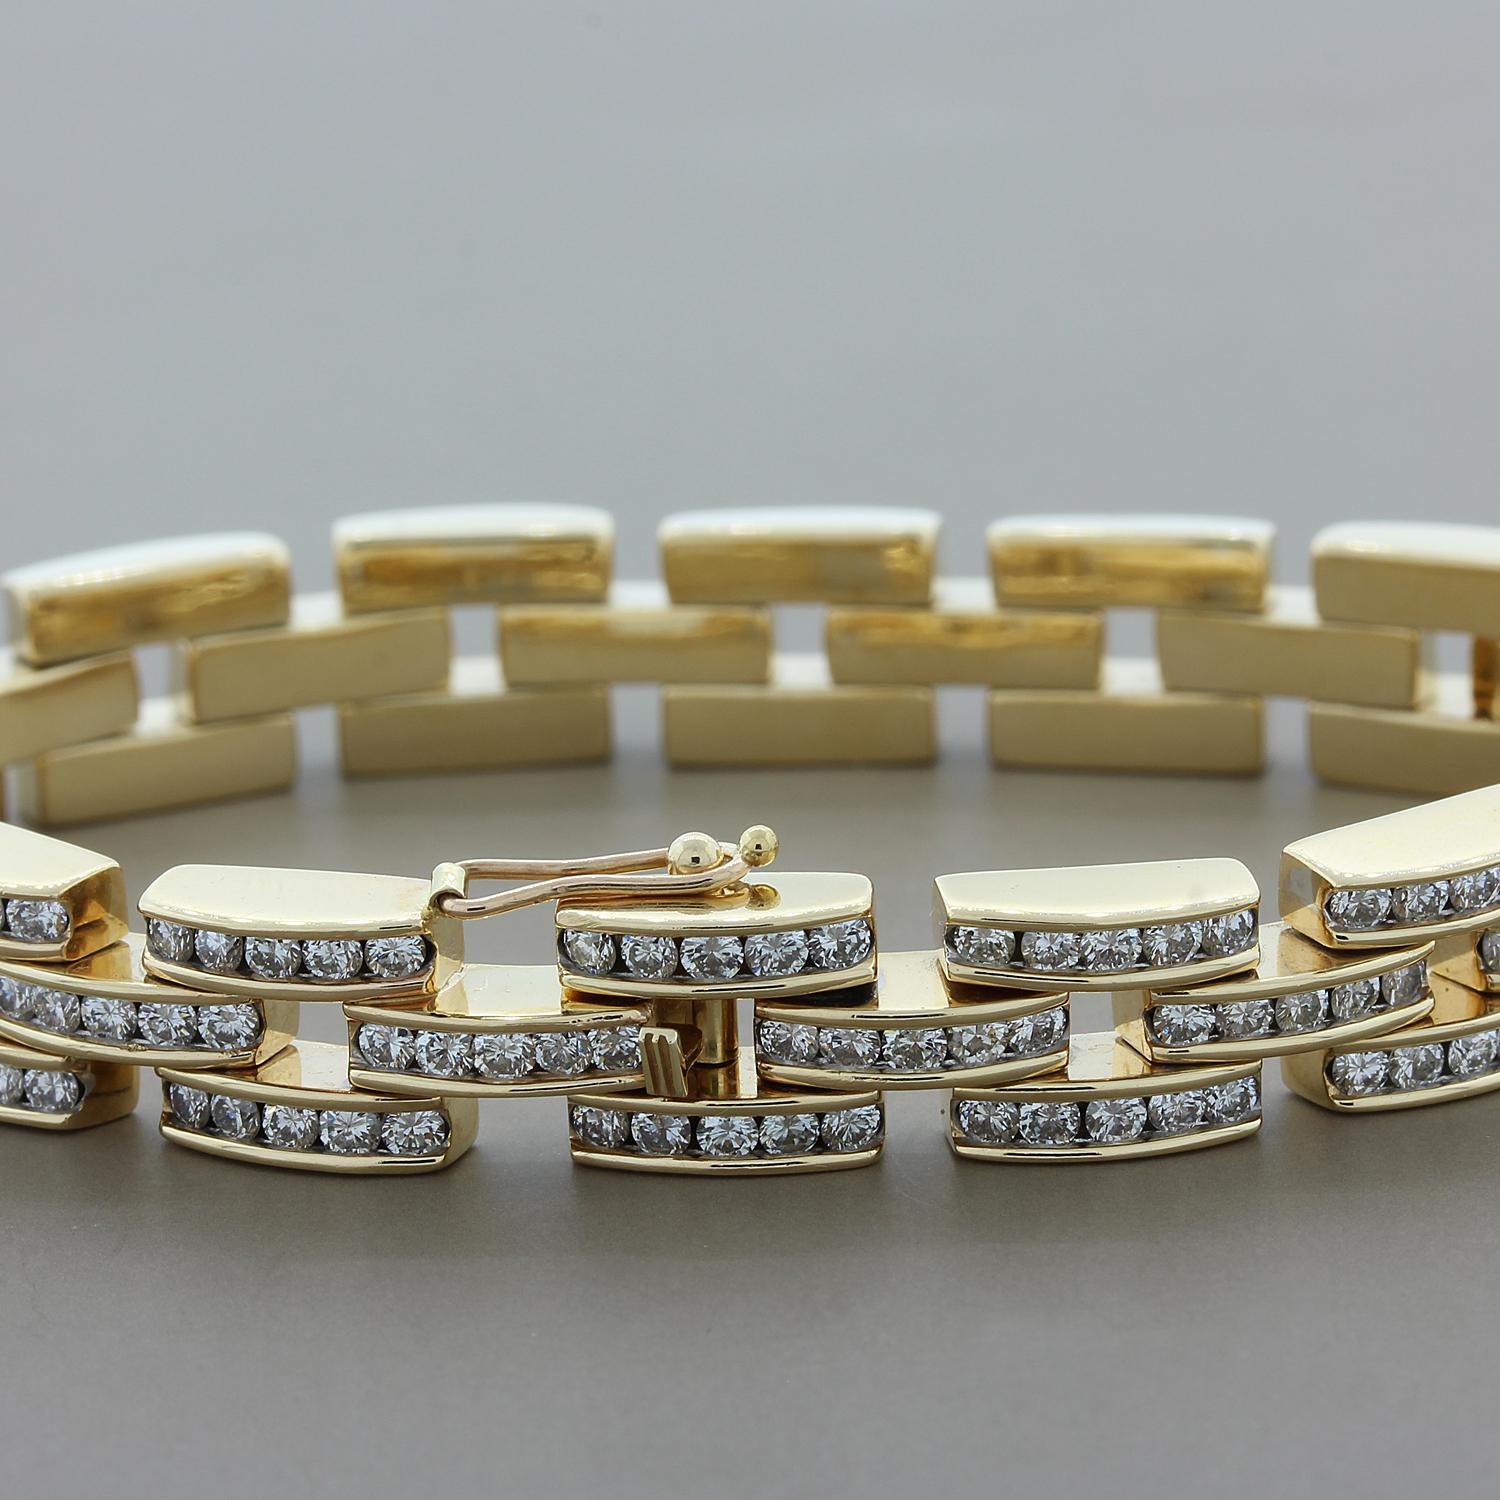 This sophisticated bracelet features 9.60 carats of round cut diamonds set in 14K yellow gold. The three rows of linked horizontal bars provide a box clasp closure and safety latch for safe keeping.  A classic bracelet to add to any